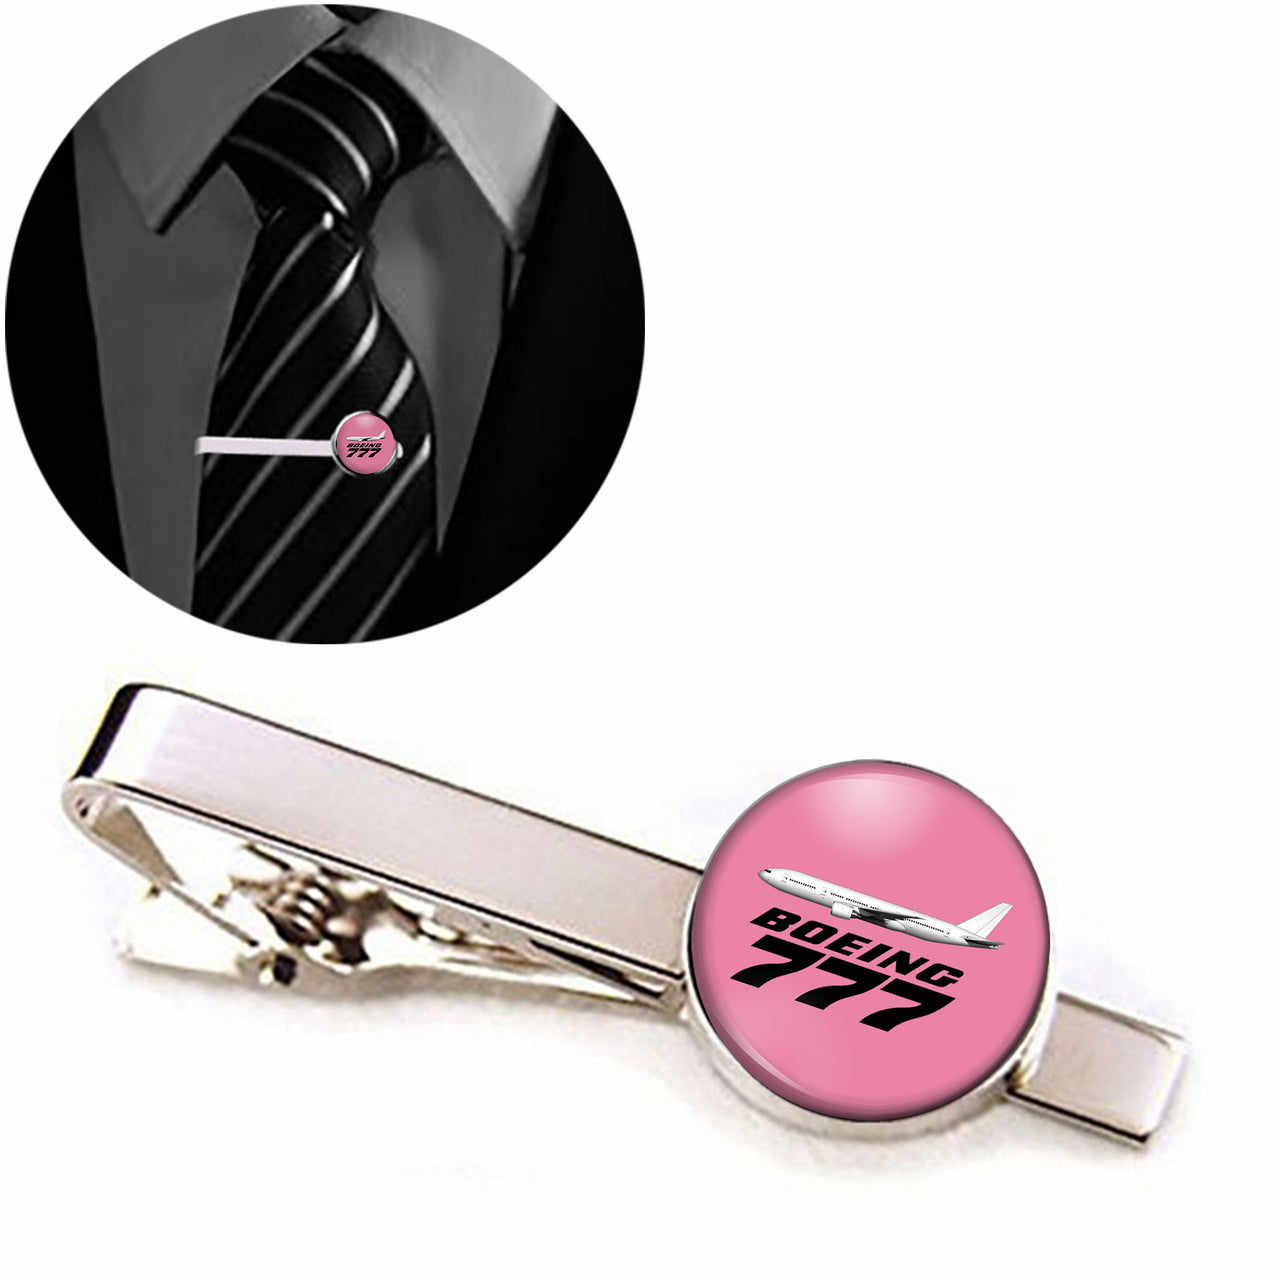 The Boeing 777 Designed Tie Clips